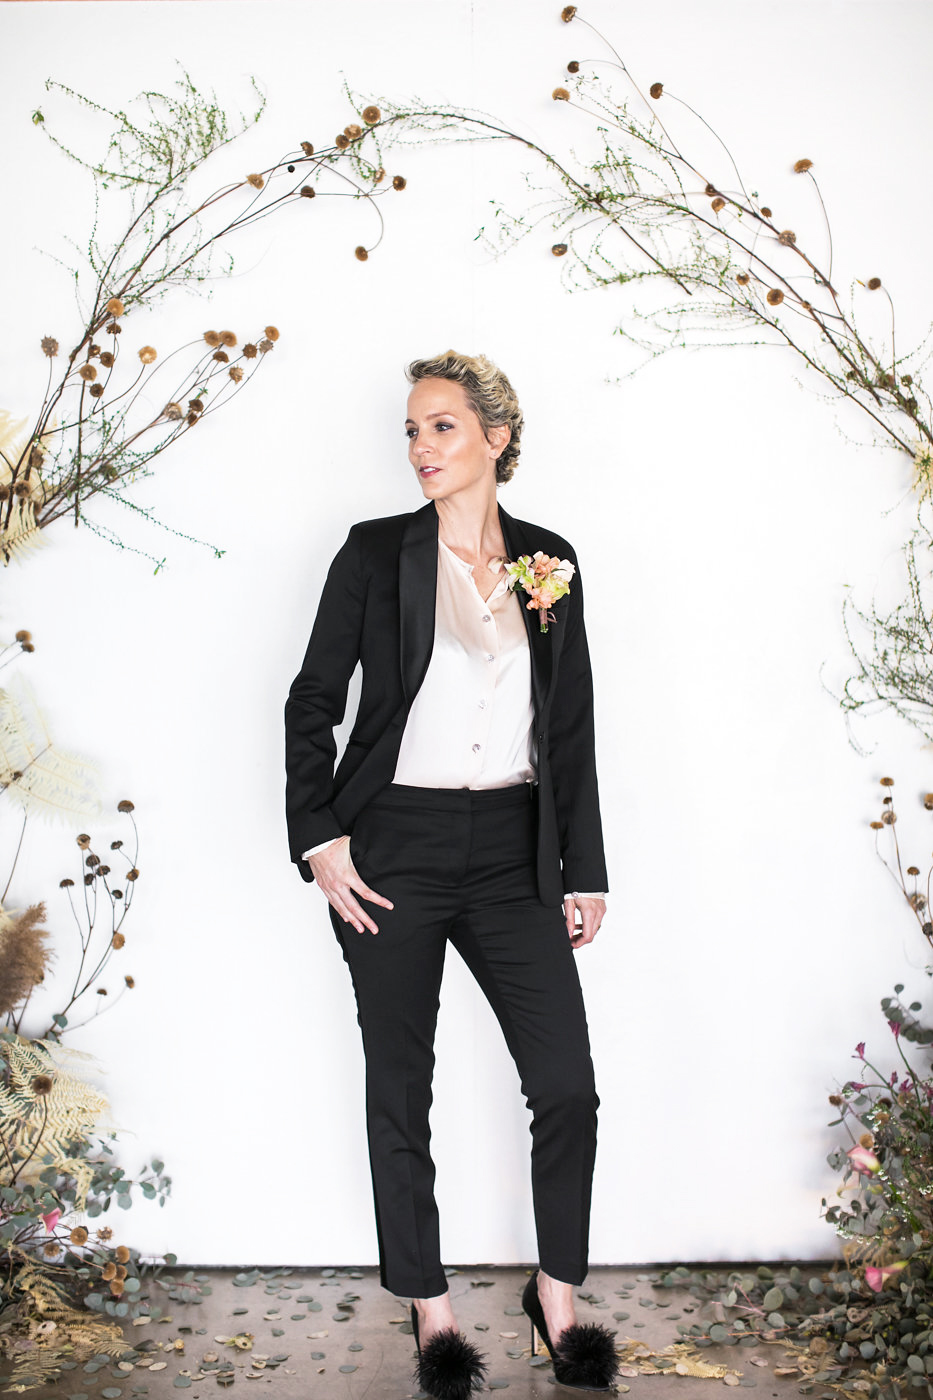 A Tuxedo for Her, By The Black Tux and BHLDN